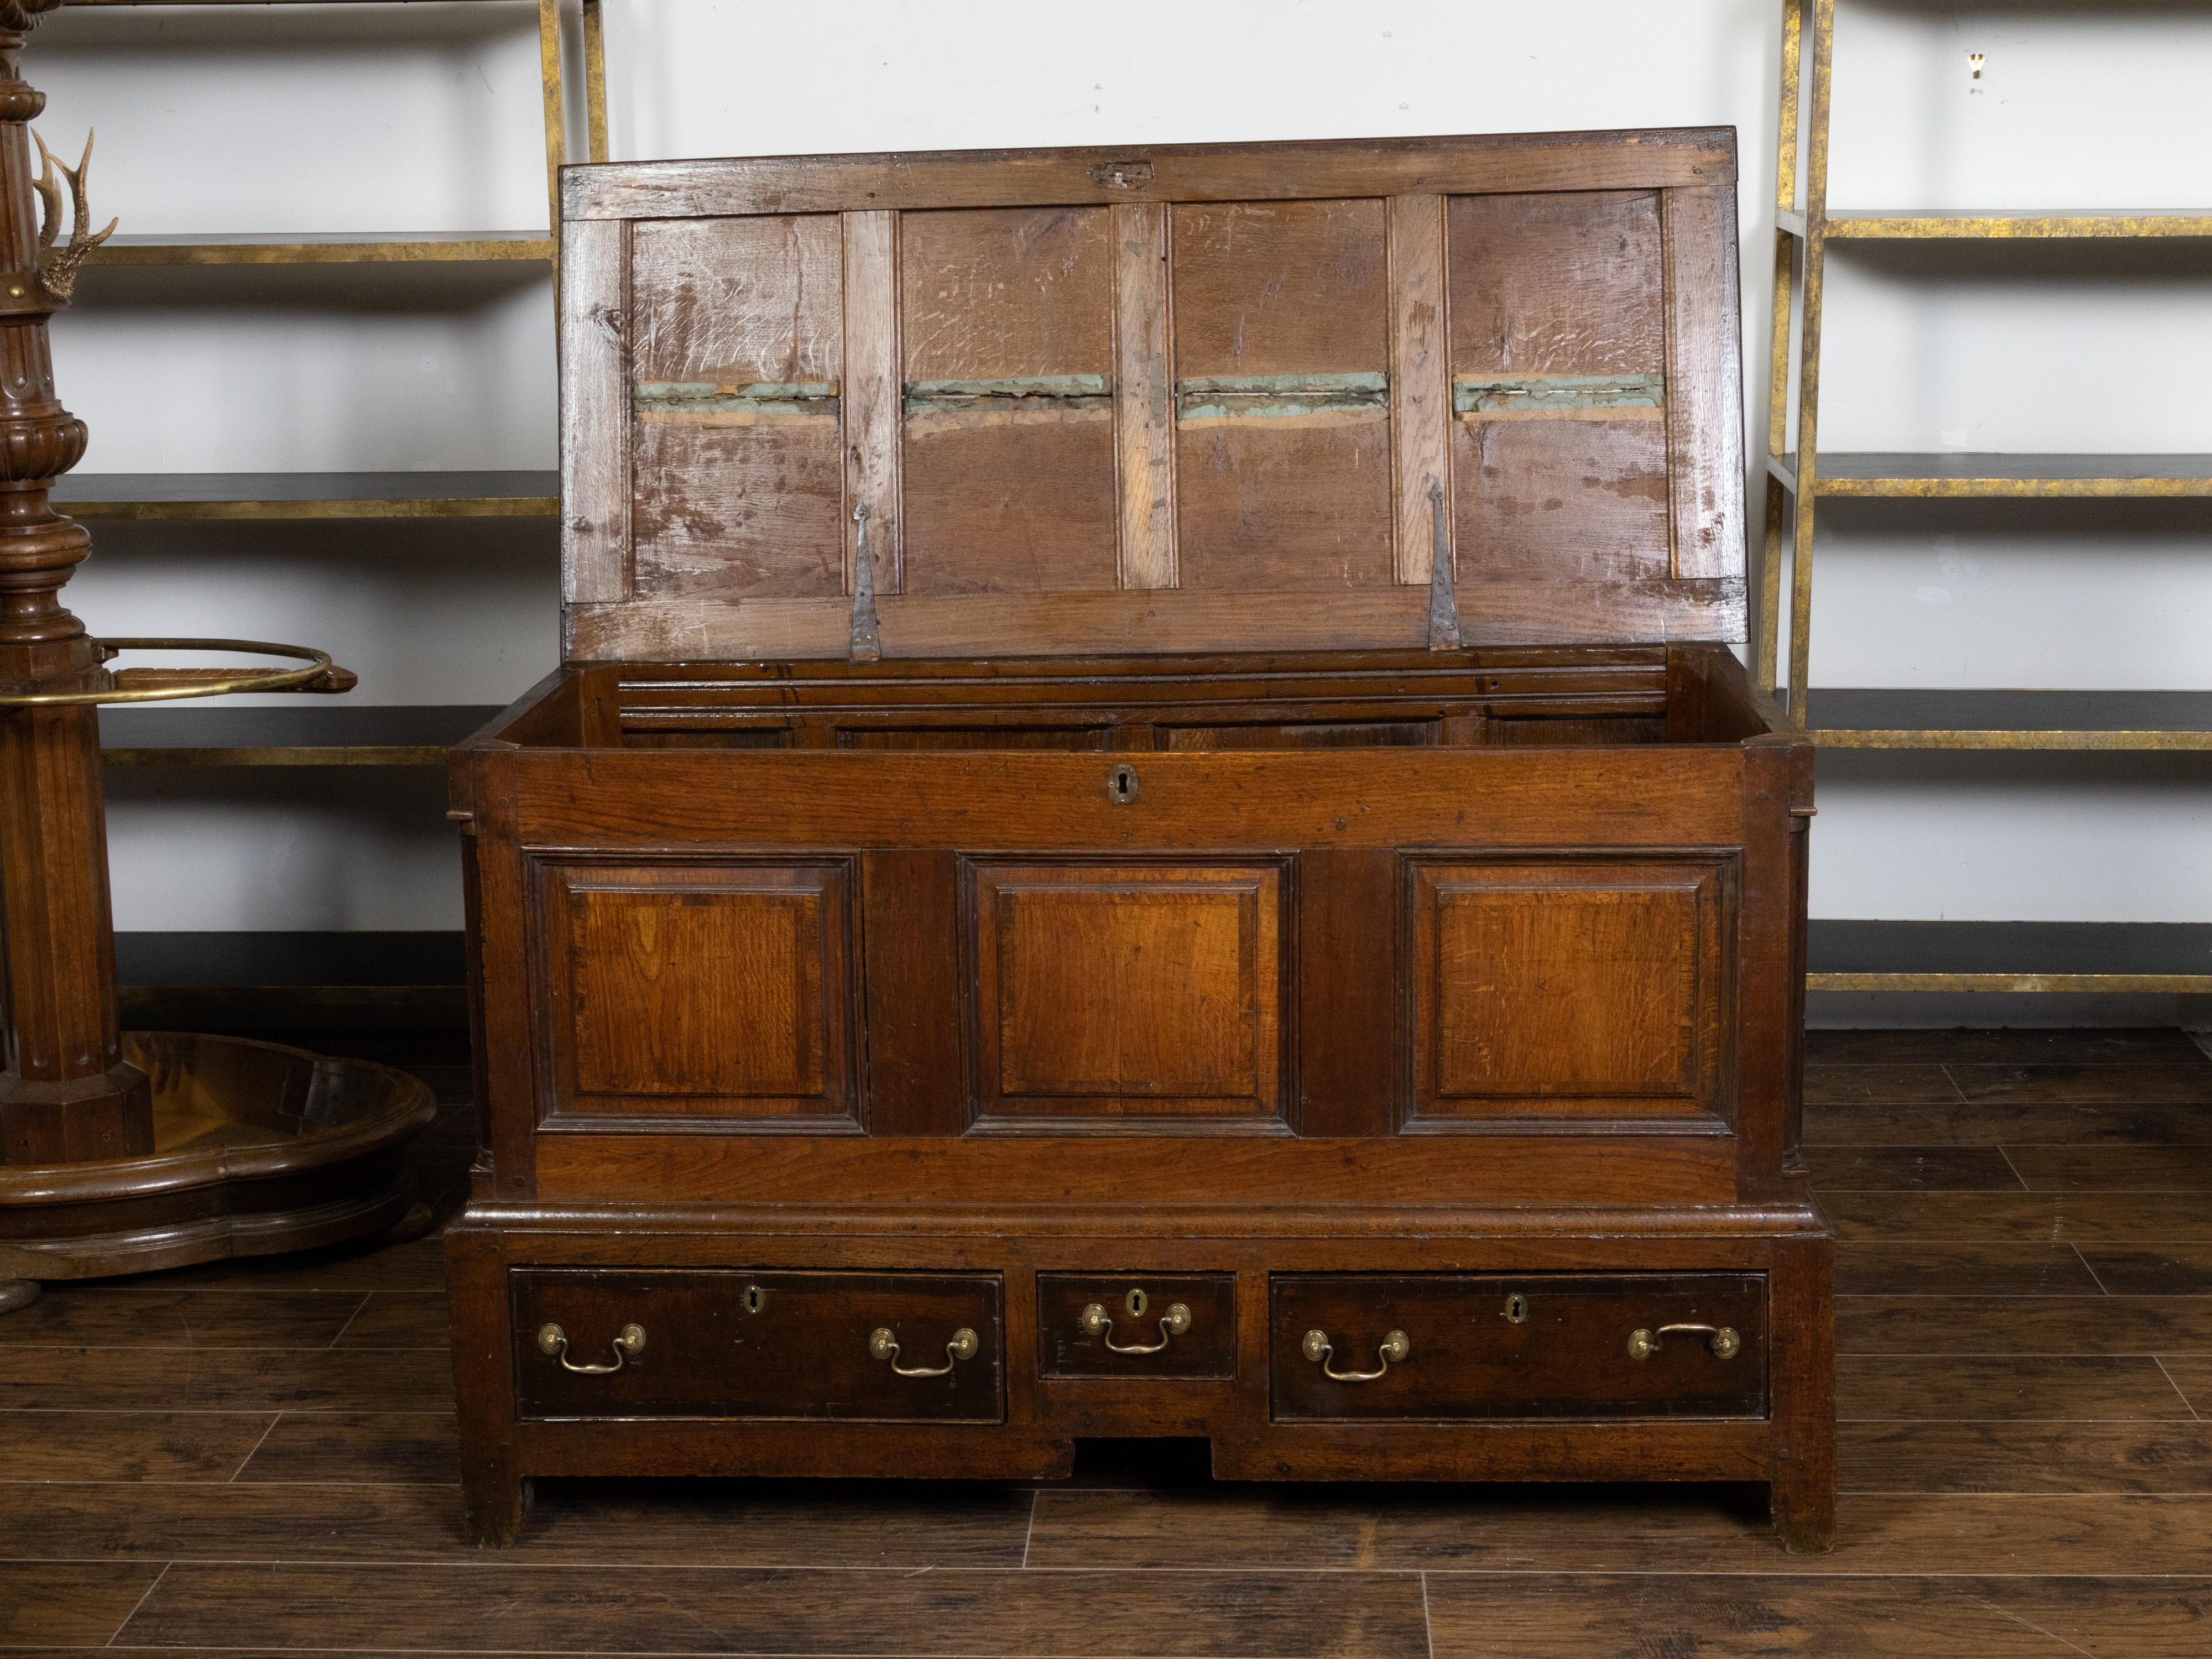 English Georgian Period 1800s Oak Mule Chest with Lift Top and Three Drawers For Sale 1